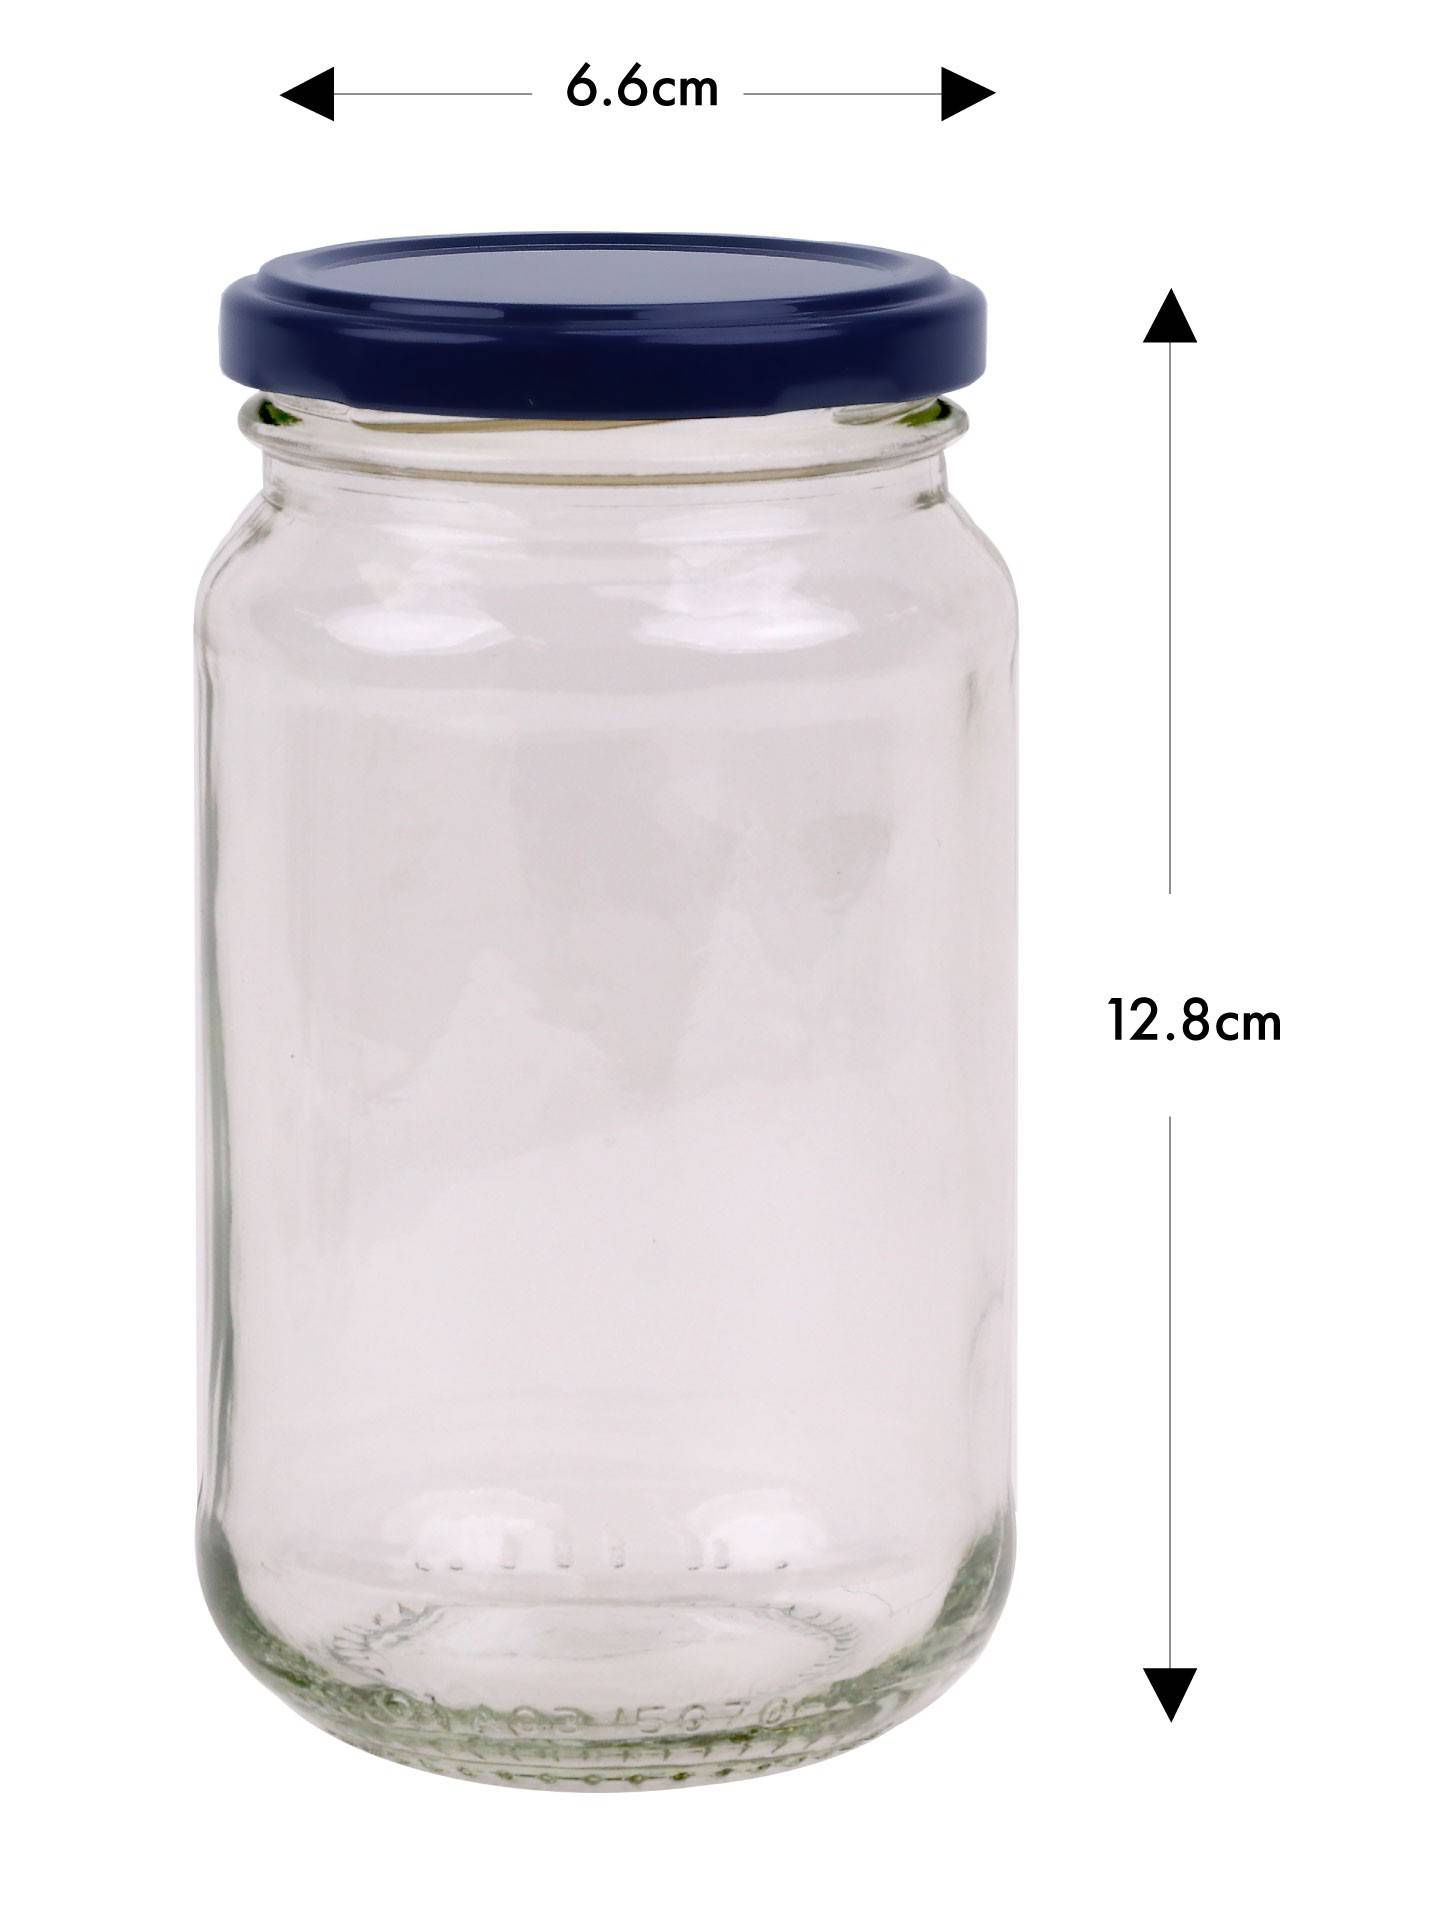 Round Glass Jars - 375ml / 500gm size - with Nude Lids. Australian Made